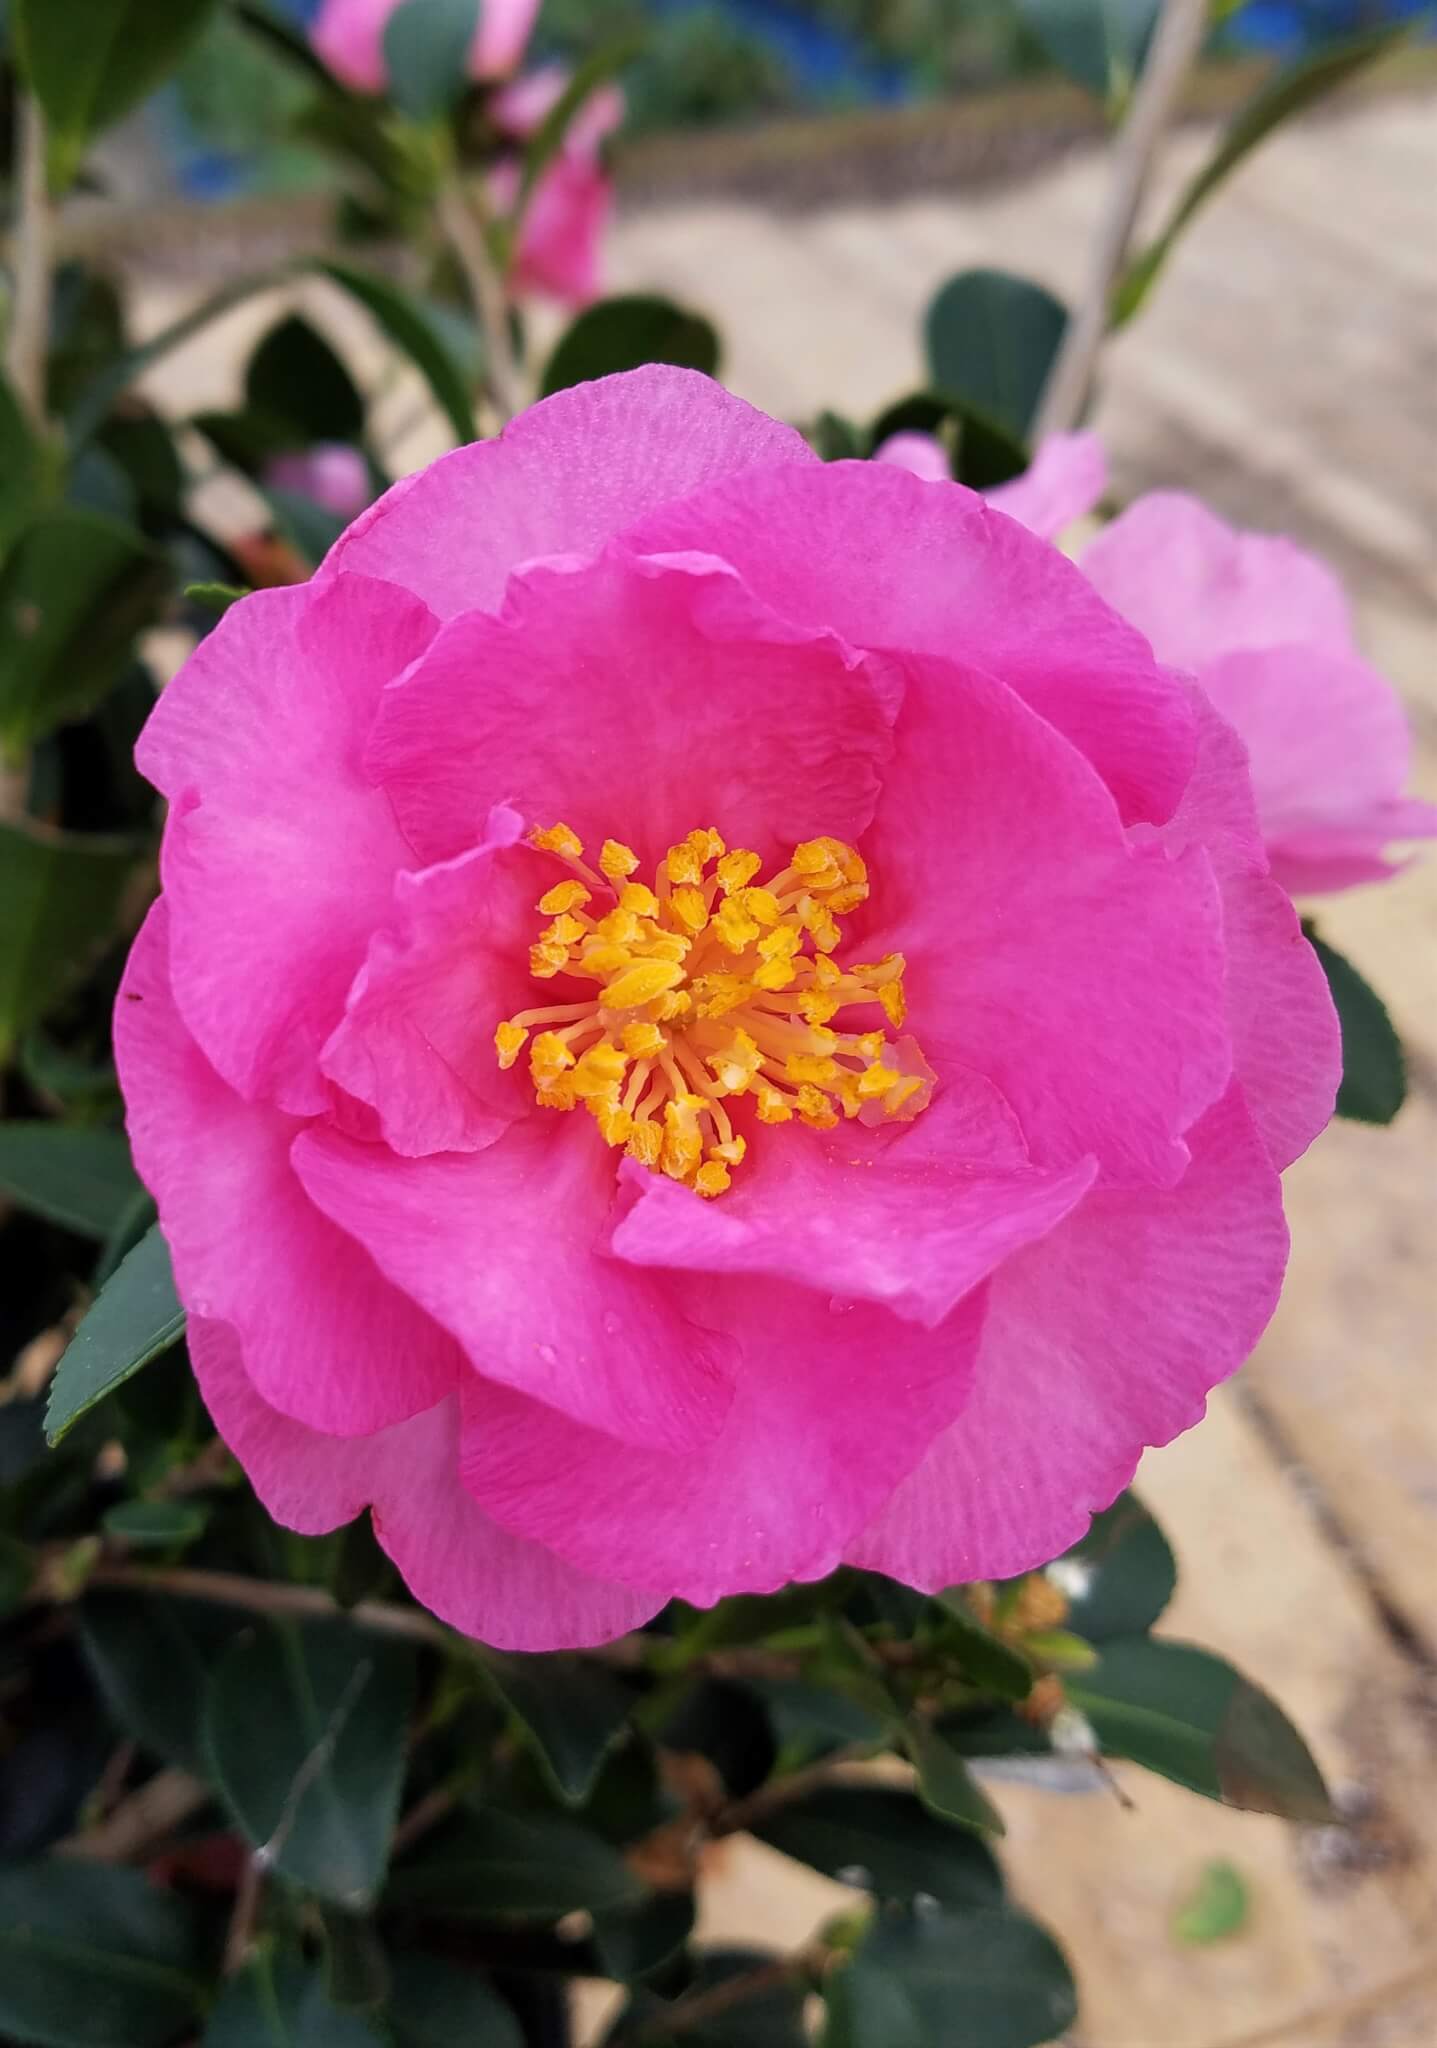 Stephanie Golden Camellia-Large Bright Pink Blooms